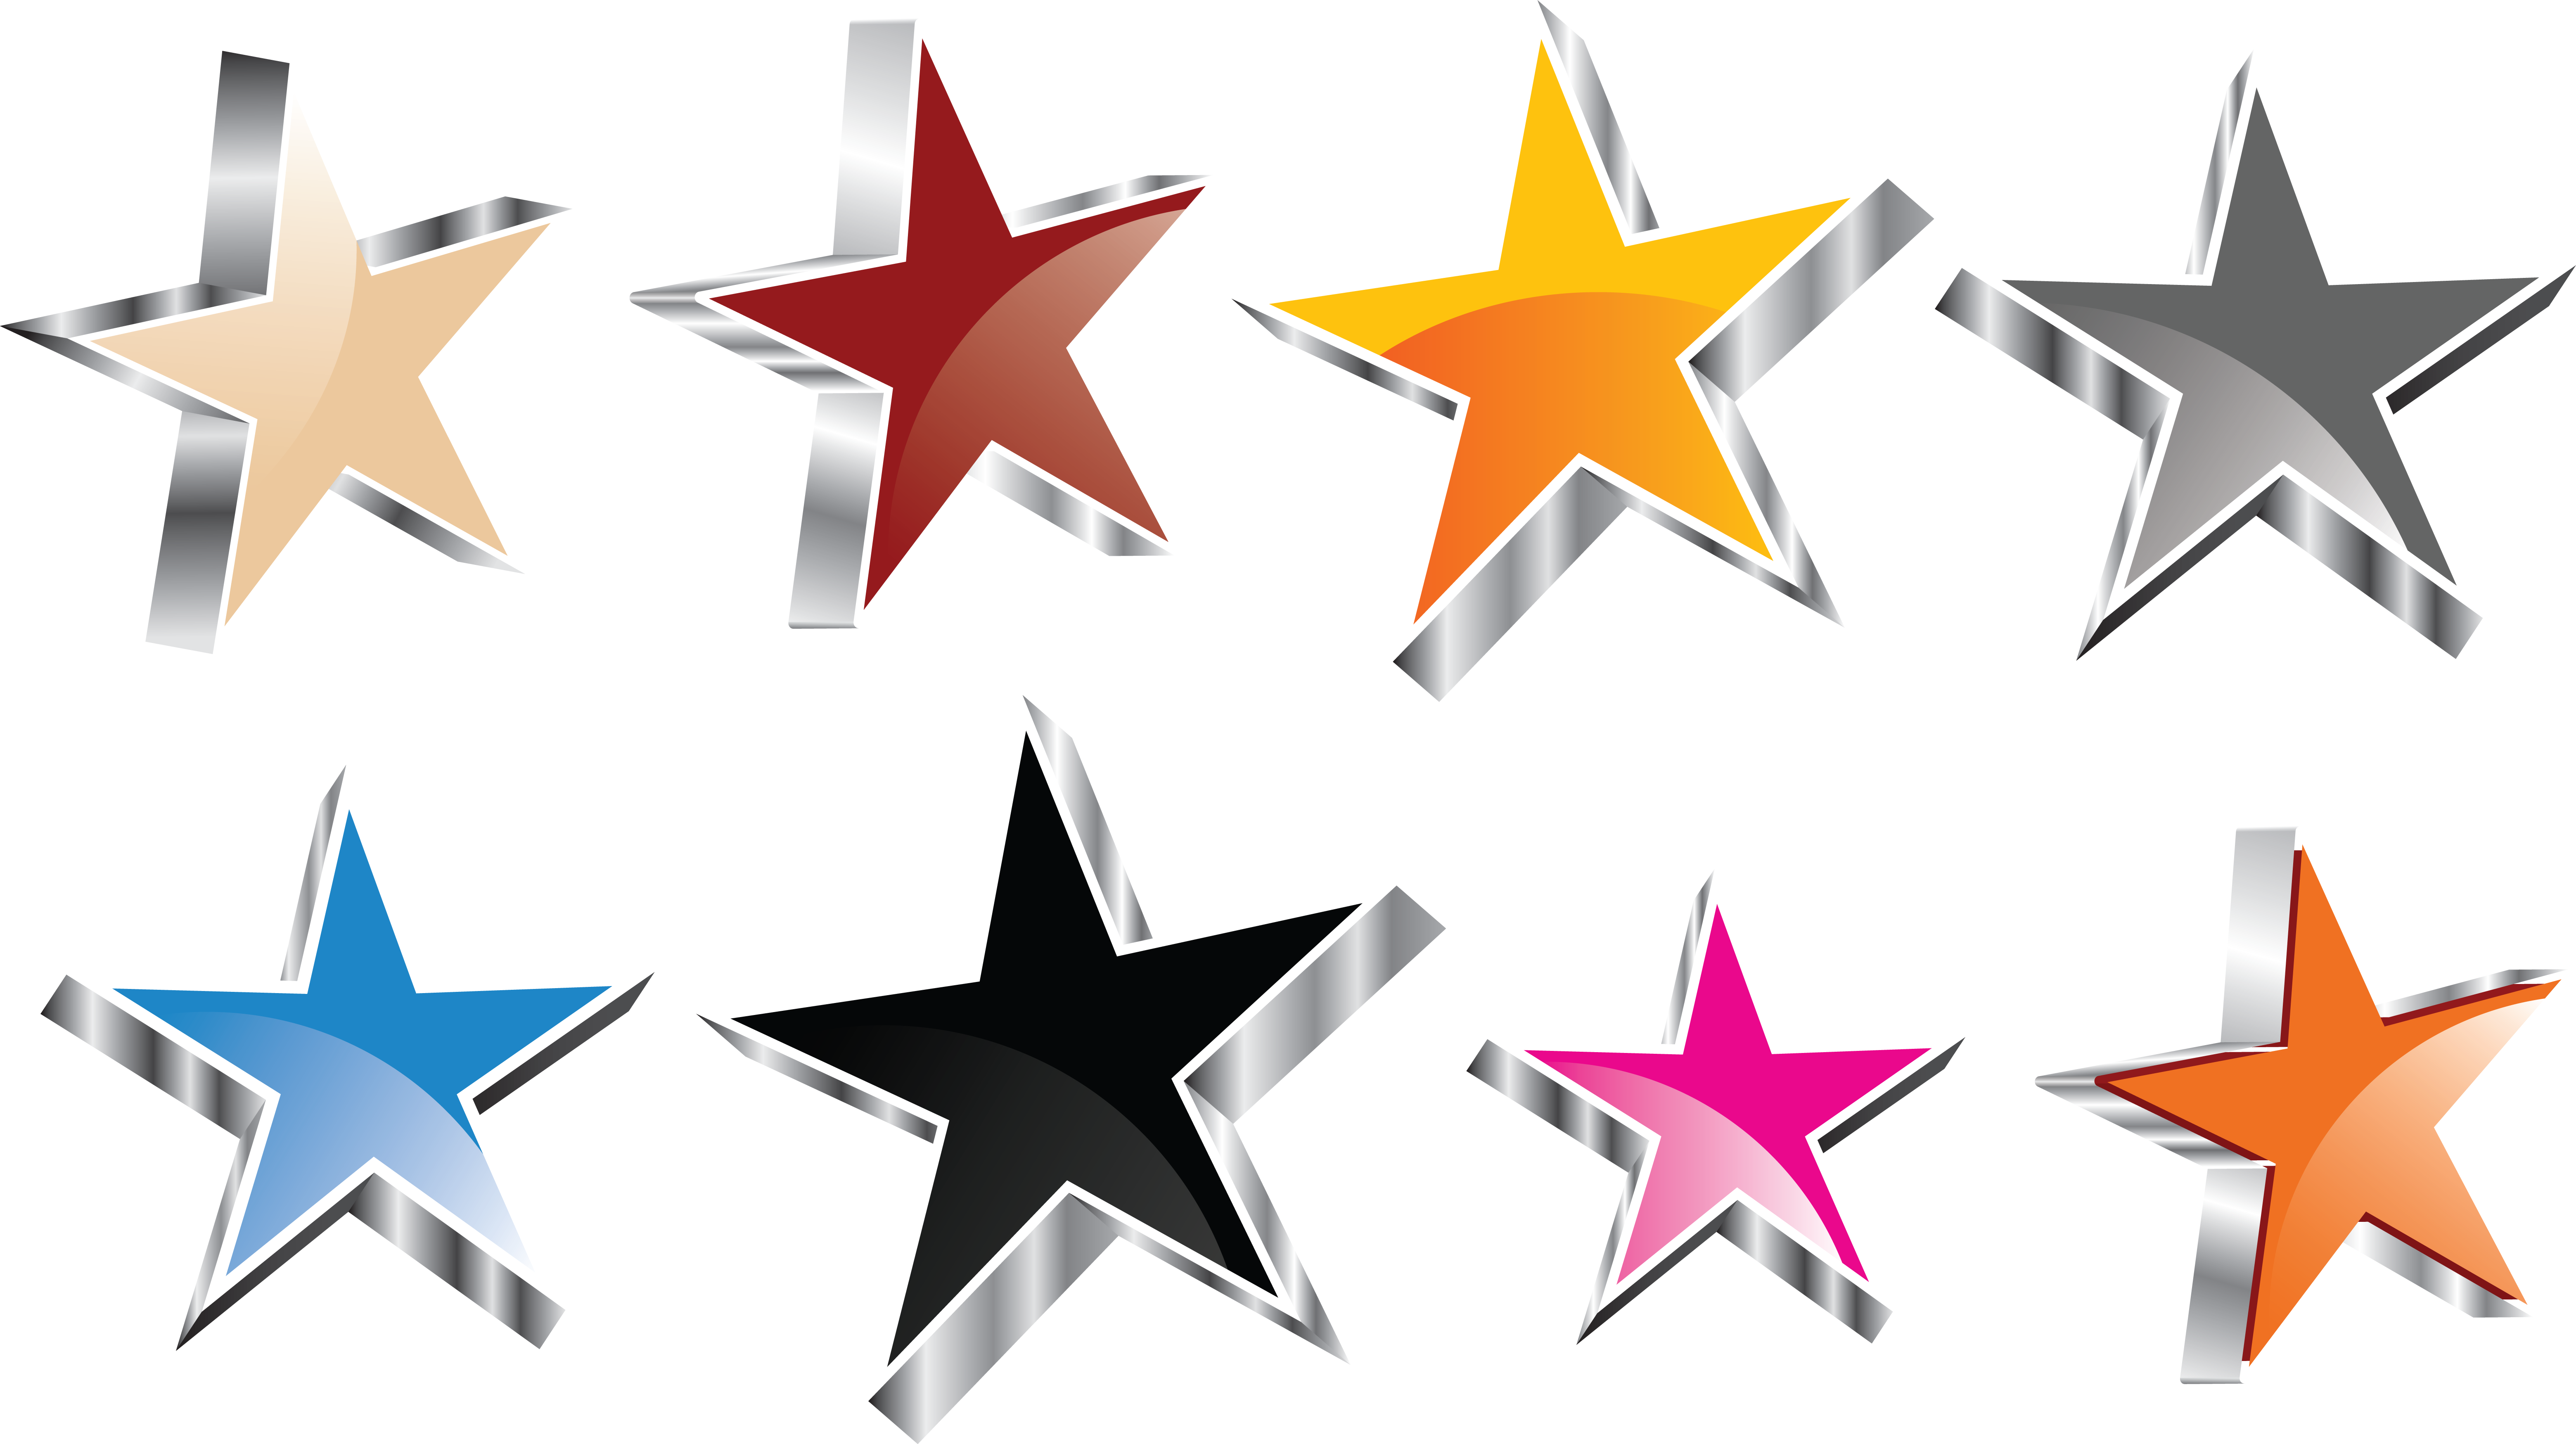 Five Stars PNG Transparent Images Free Download, Vector Files